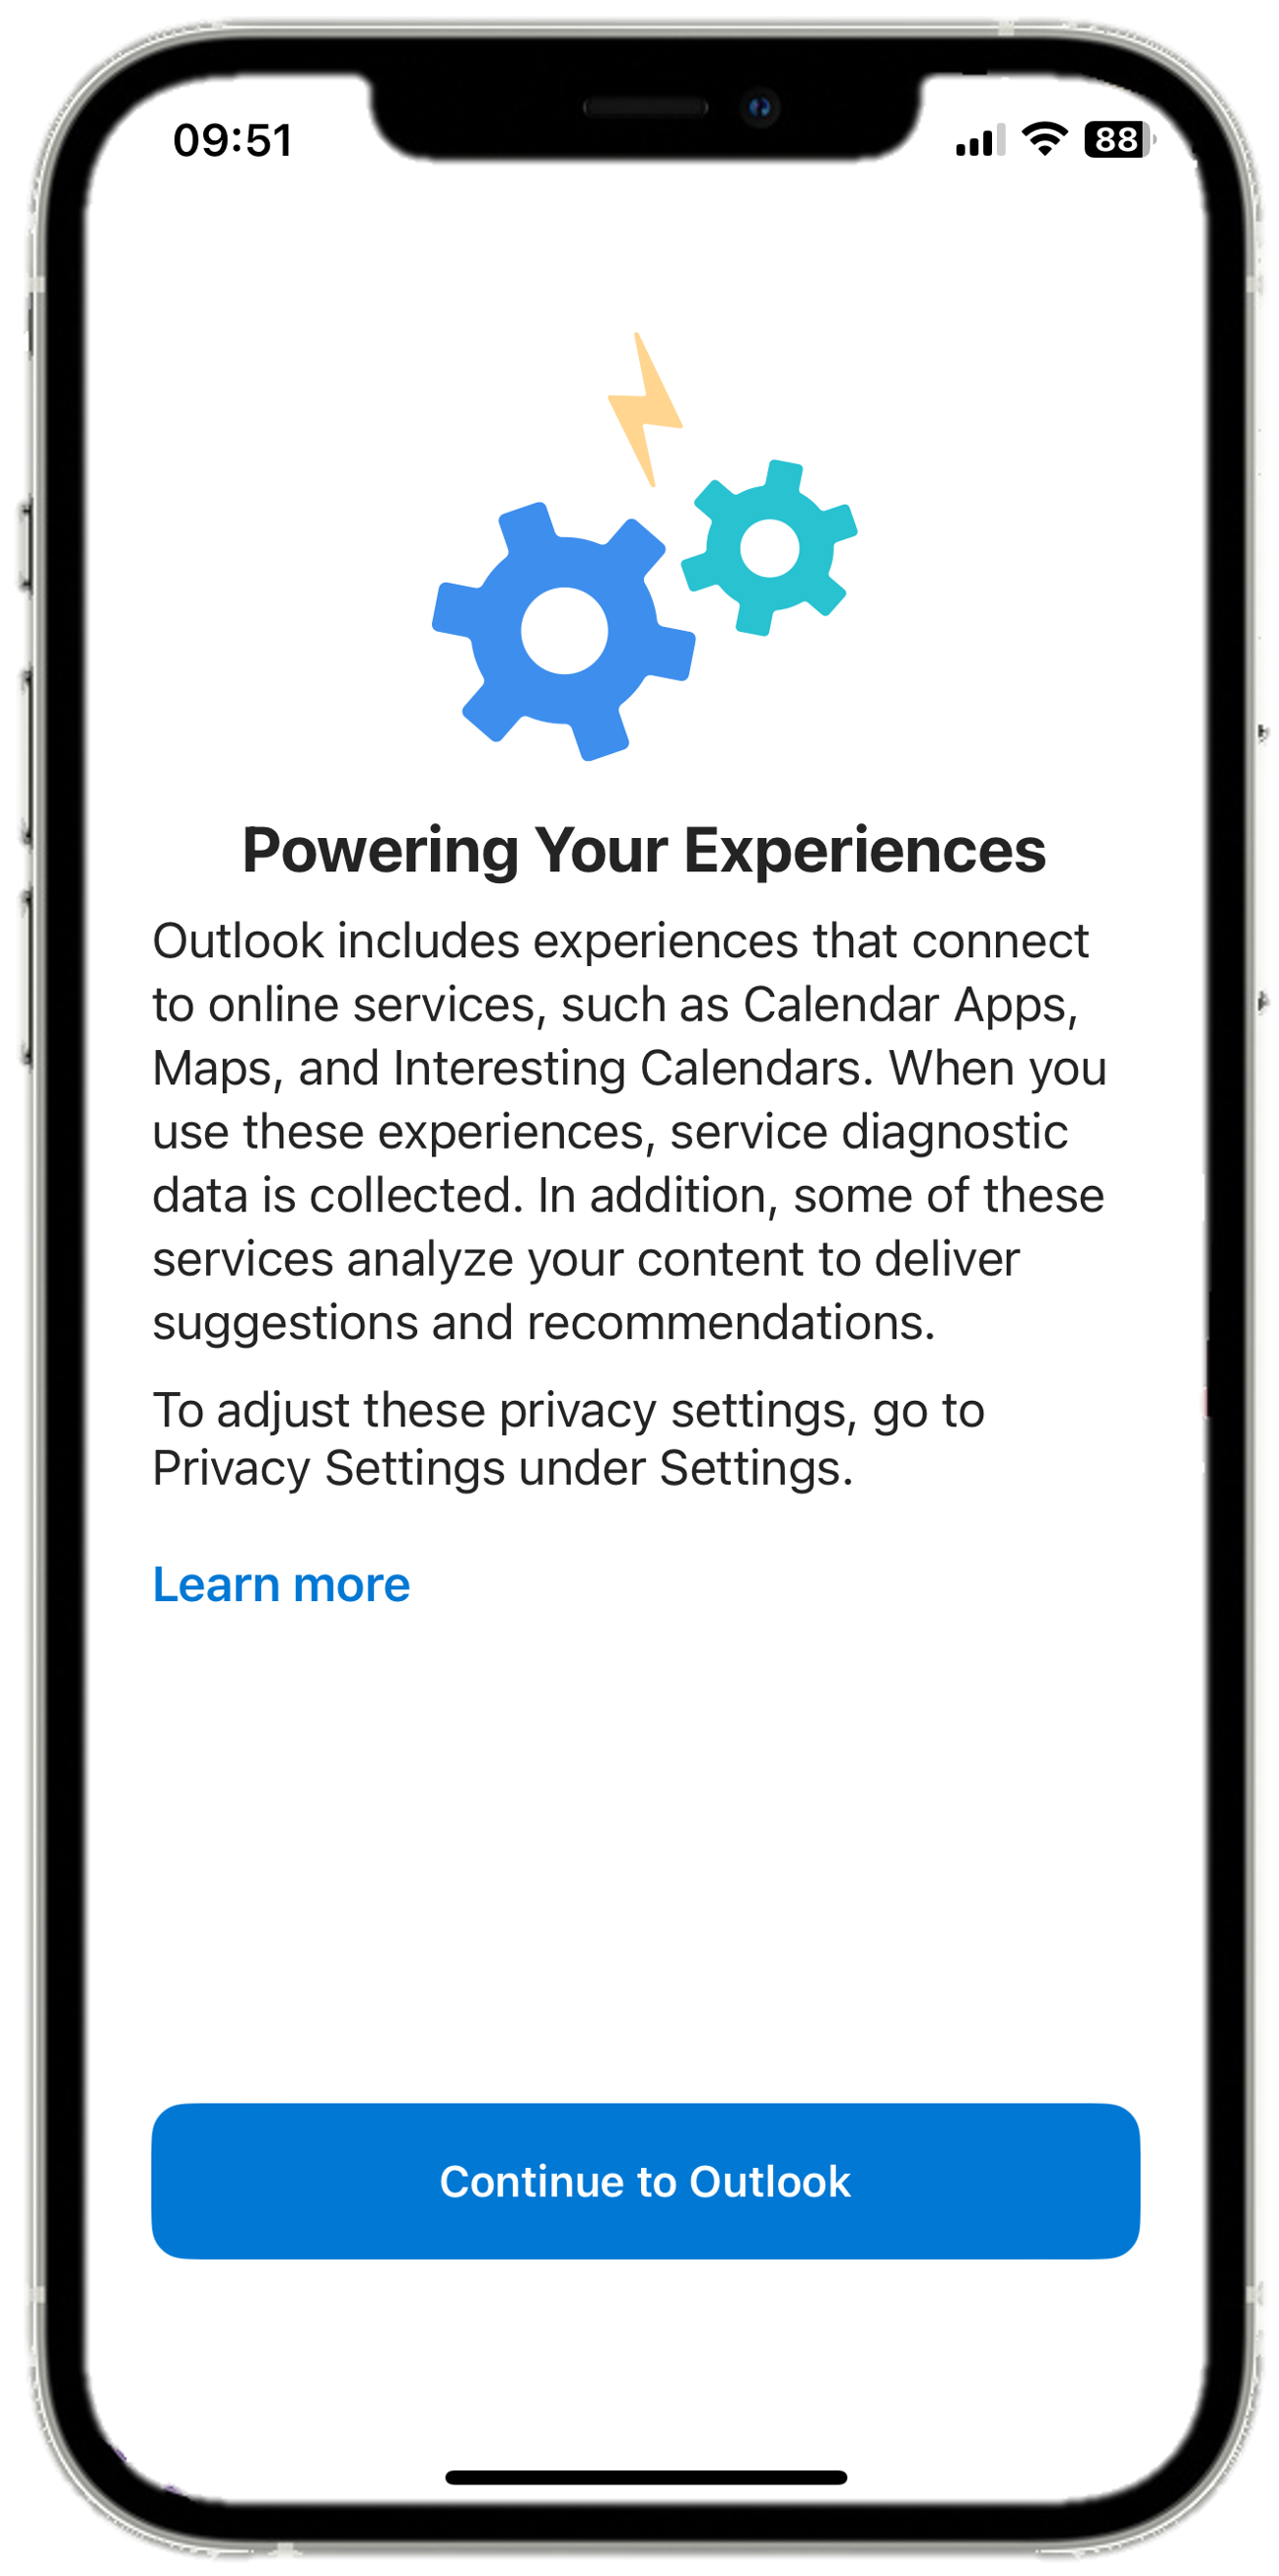 iOS 17 - Outlook Mobile - Powering your experiences.png